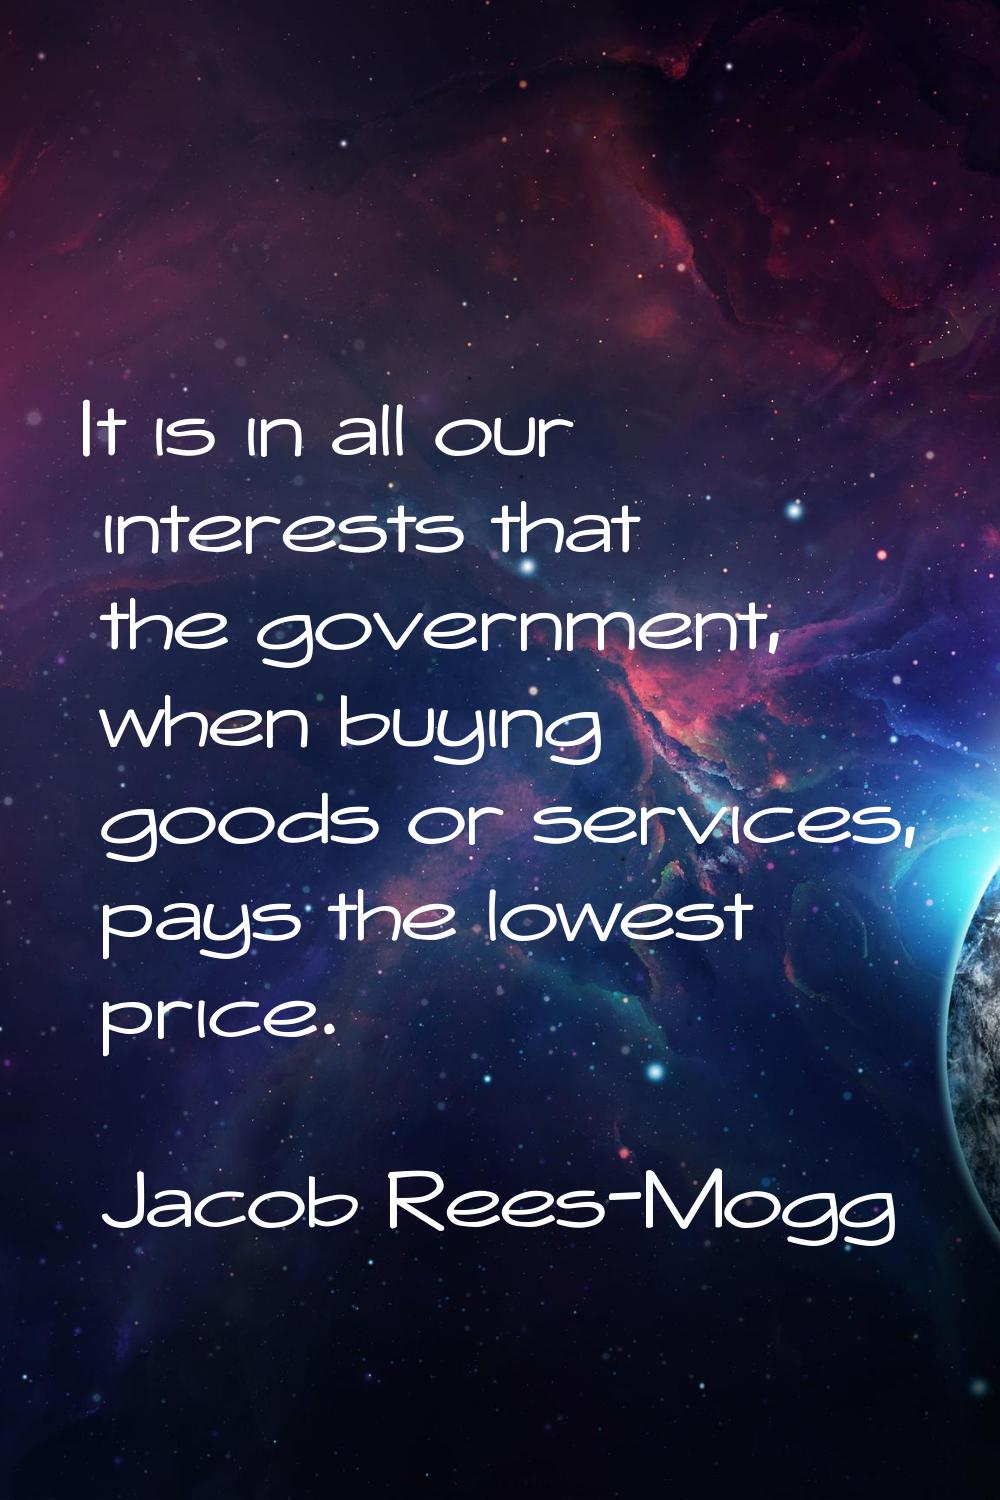 It is in all our interests that the government, when buying goods or services, pays the lowest pric